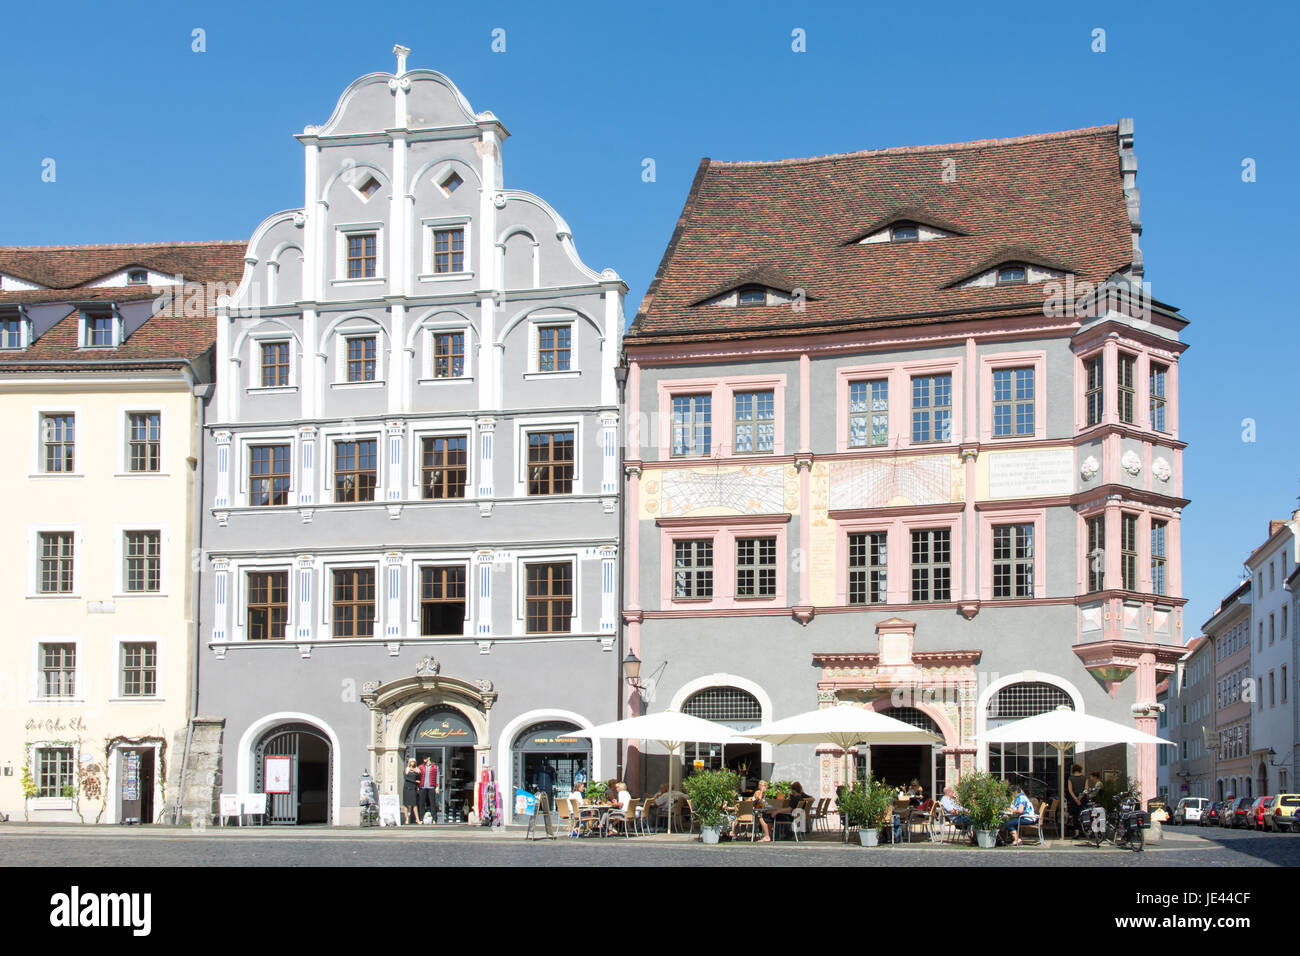 GOERLITZ, GERMANY - SEPTEMBER 5: Tourists at a cafe in the old town of Goerlitz, Germany on September 5, 2014. The historic town of Goerlitz is often used as film location. Foto taken from Untermarkt. Stock Photo